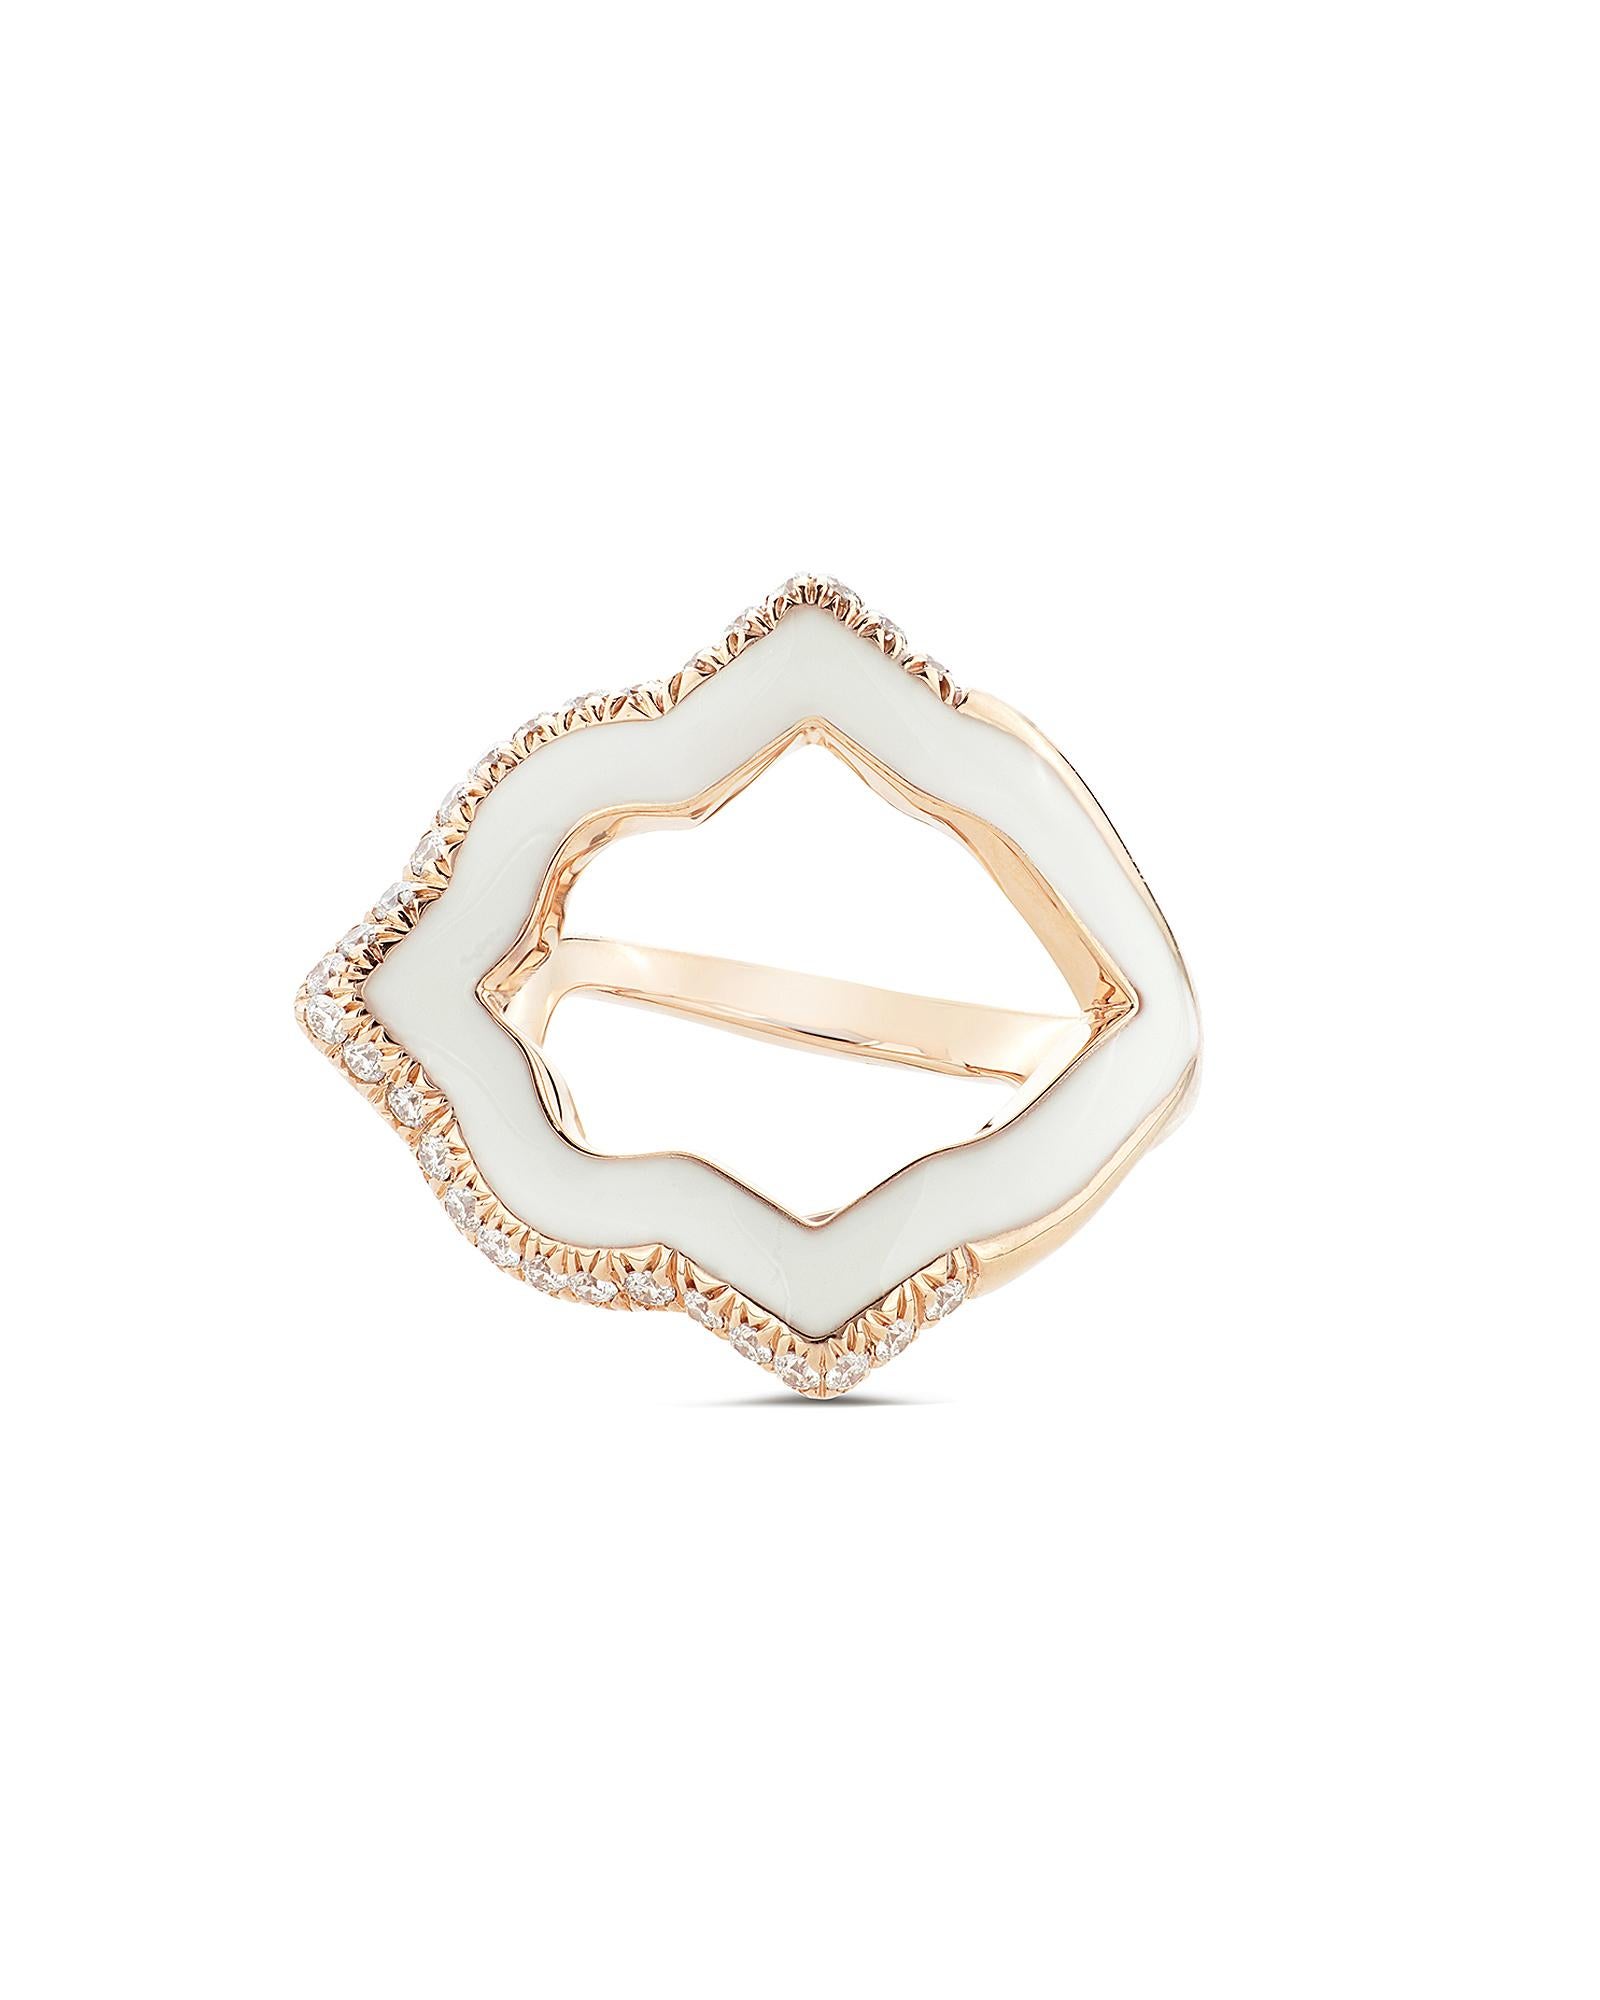 The Anime ring, made of rose gold, white enamel, and diamonds, is the rock version of the iconic symbol of the House. The sinuous and unique shape of the jewel is decorated with enamel and embellished with diamonds. The versatile jewel adds an